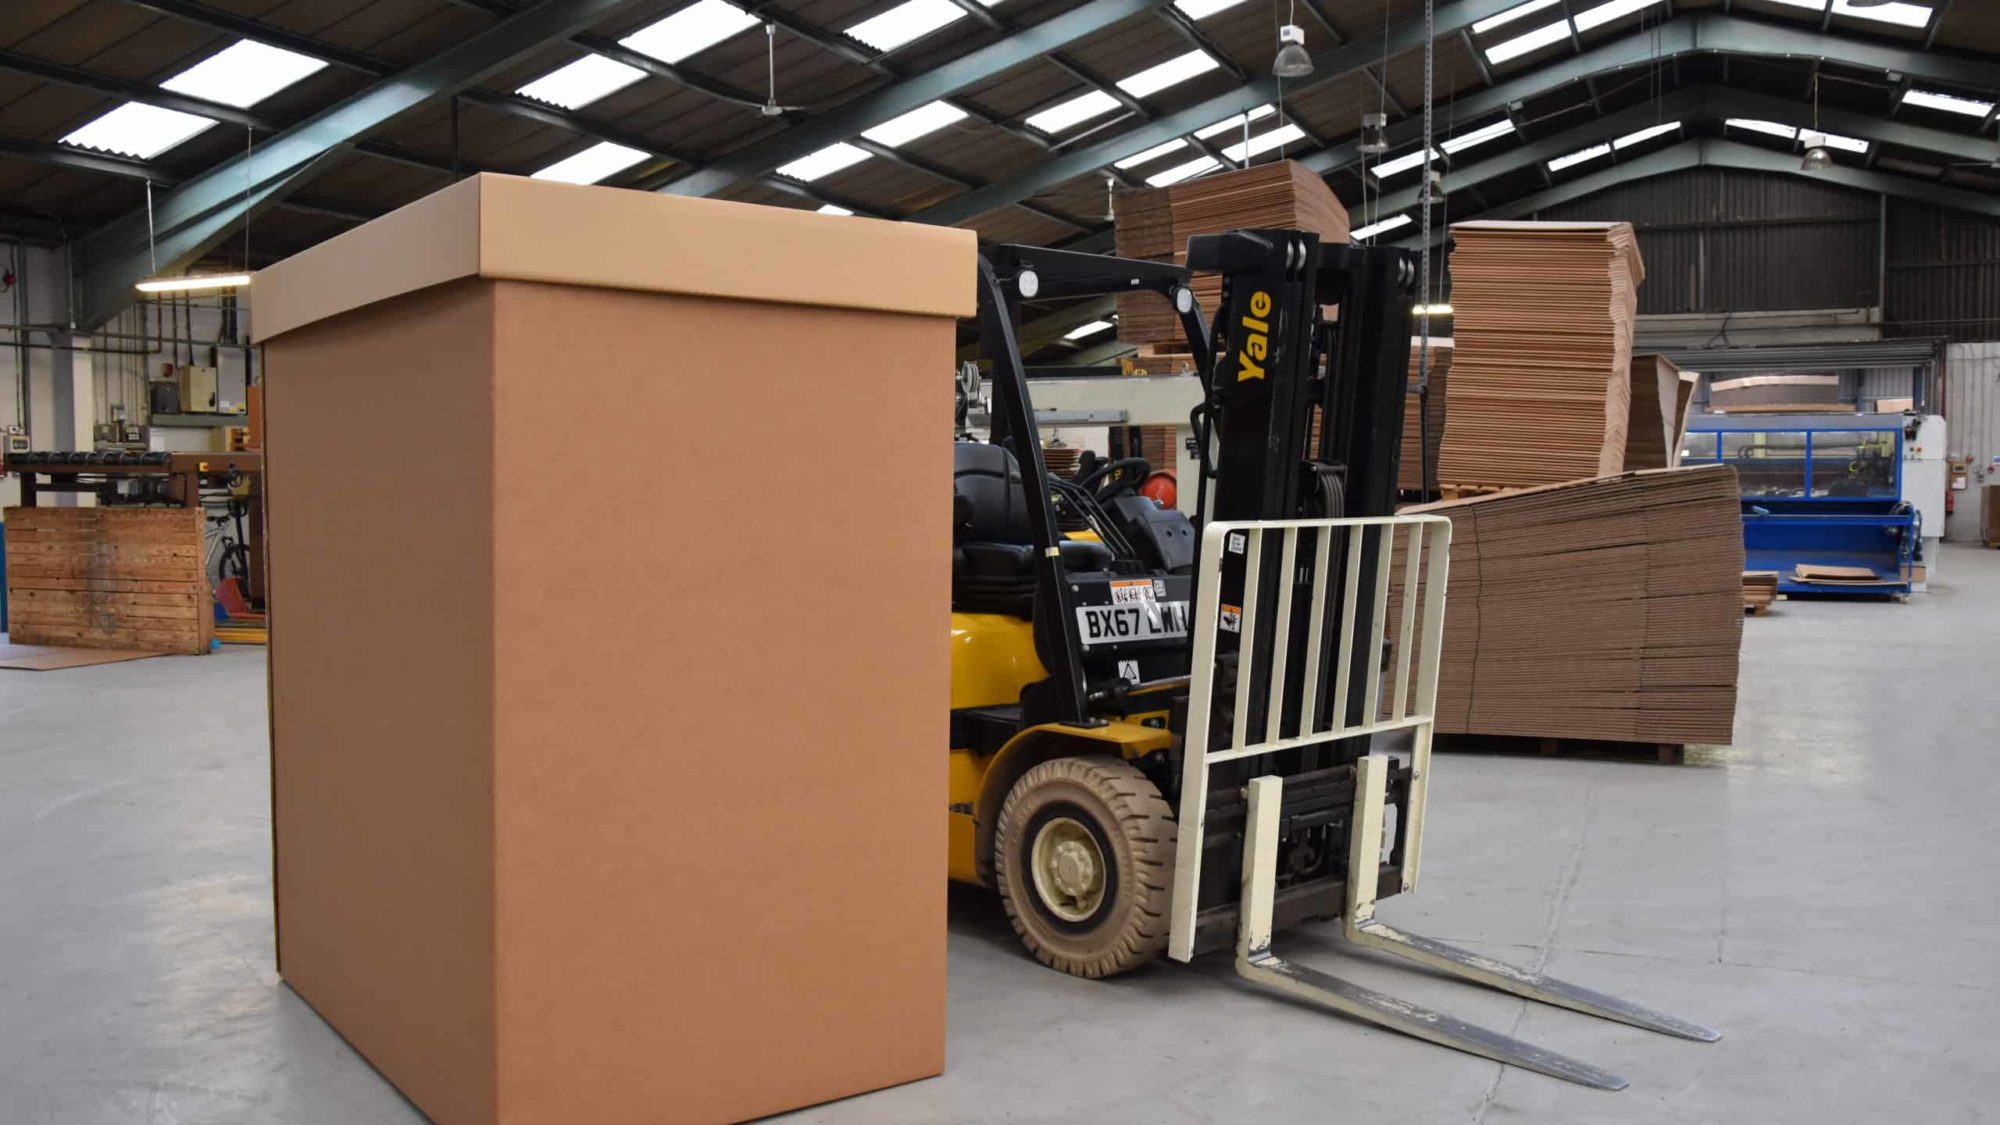 Packaging business invests for growth